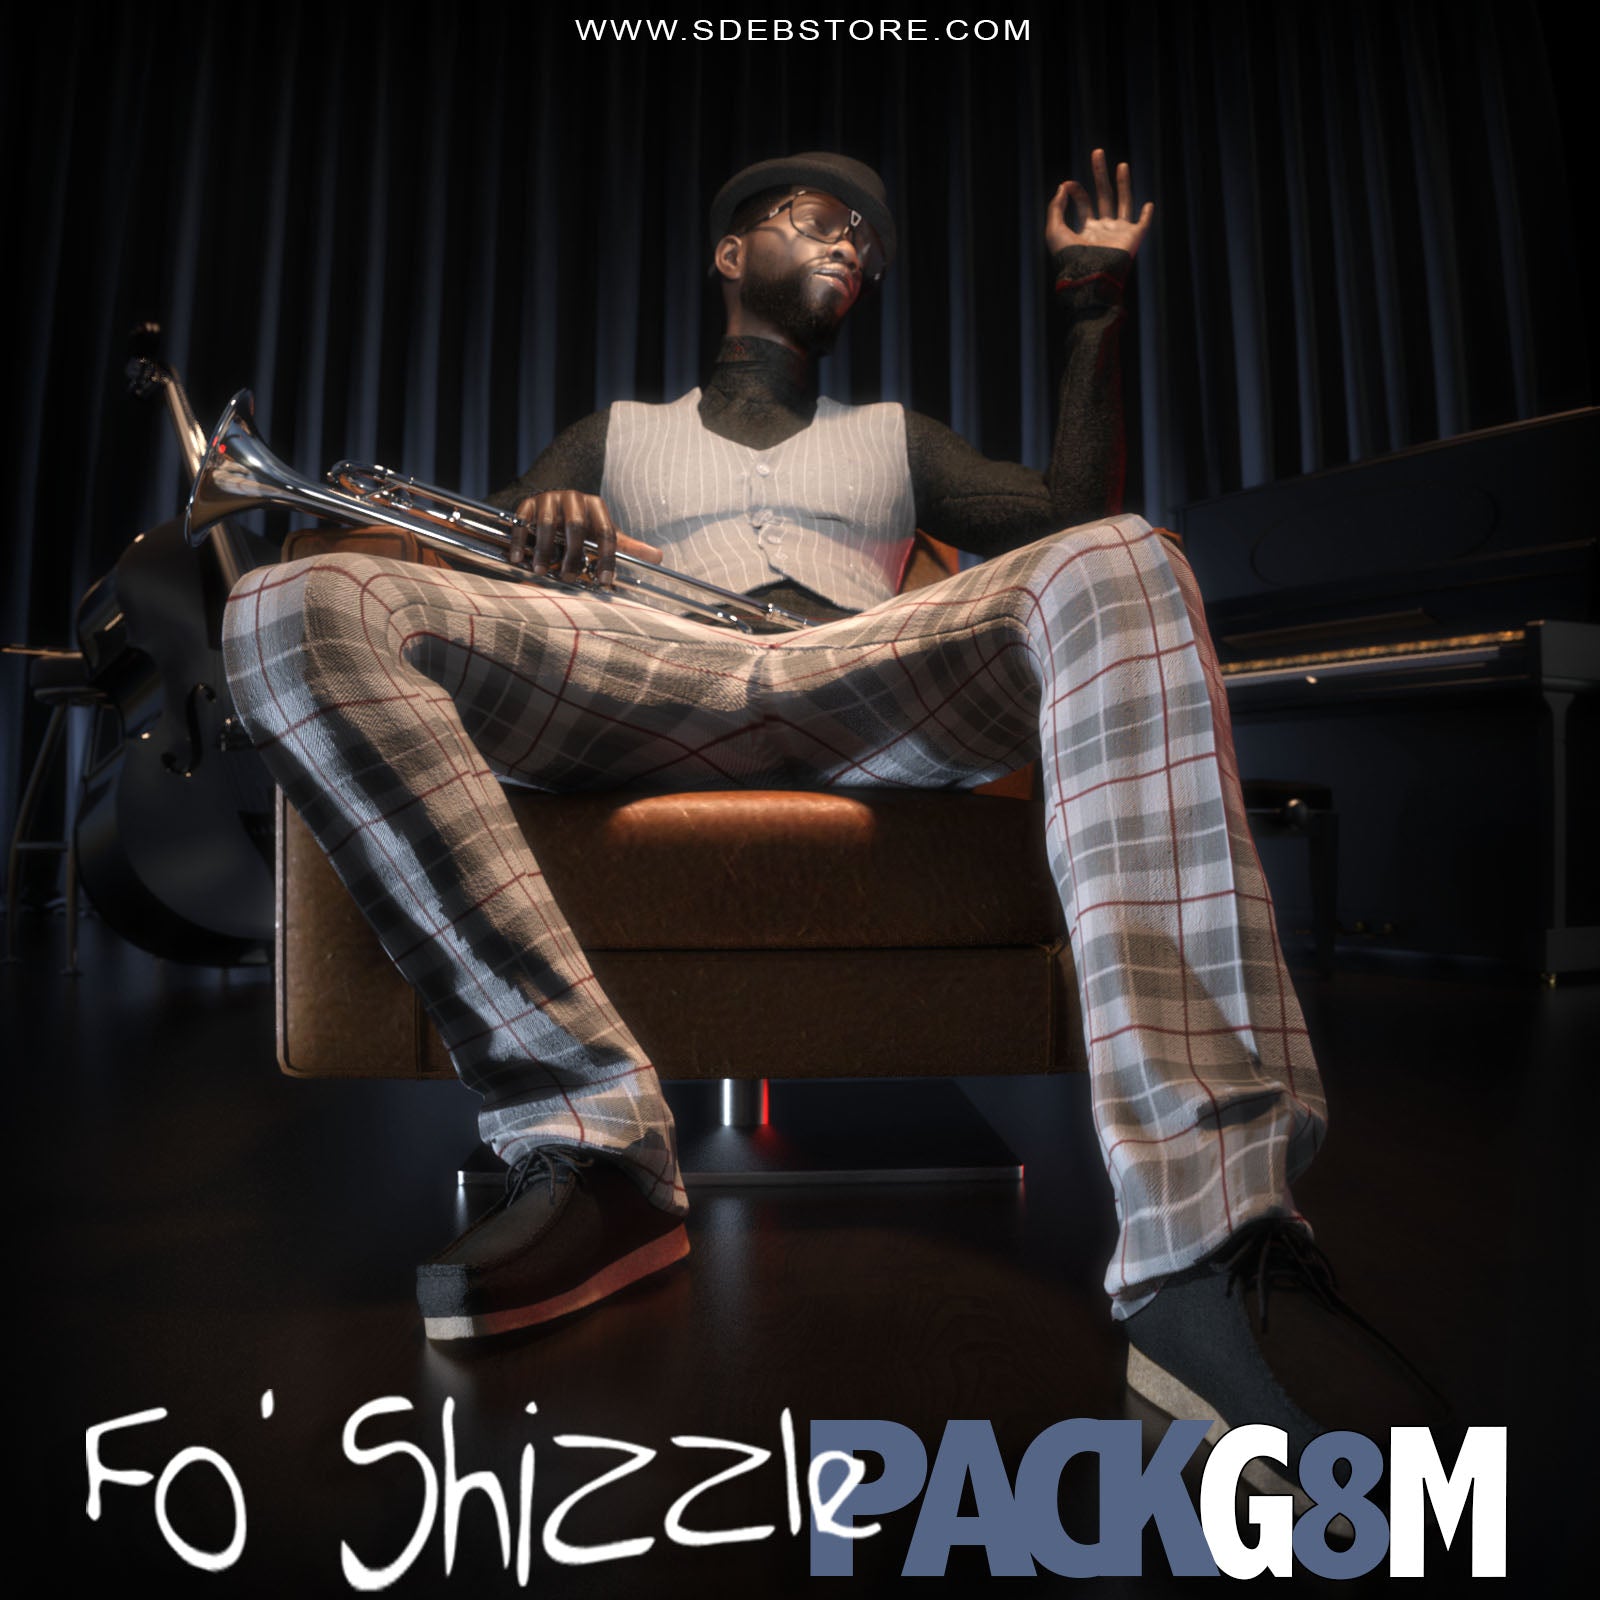 Fo' Shizzle Pack G8M